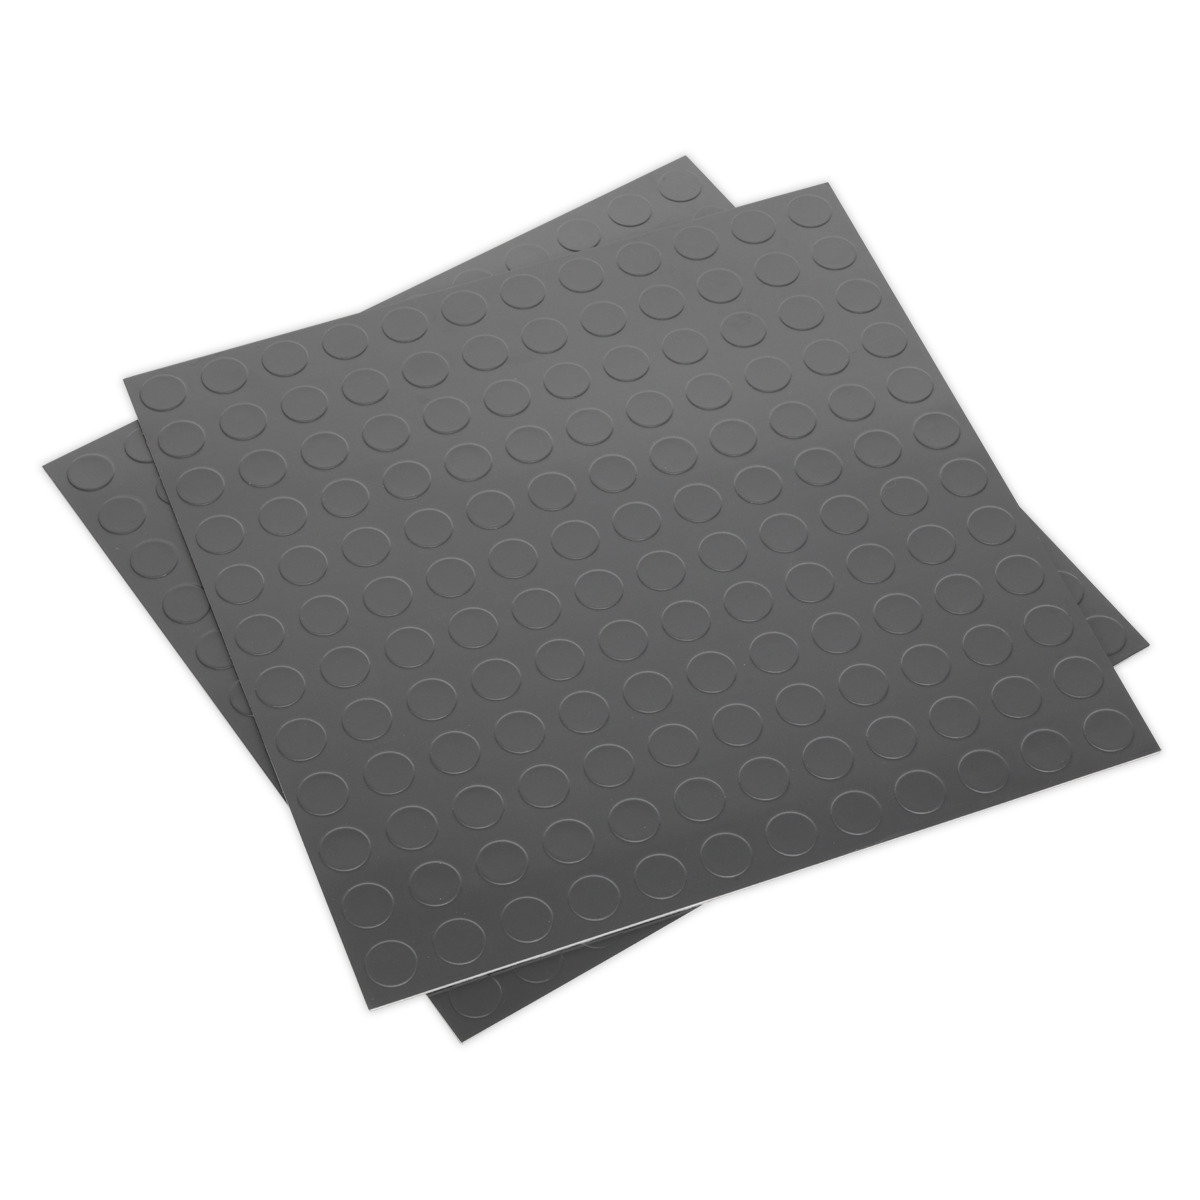 Vinyl Floor Tile With Peel & Stick Backing - Silver Coin Pack Of 16 - Sealey Ft2